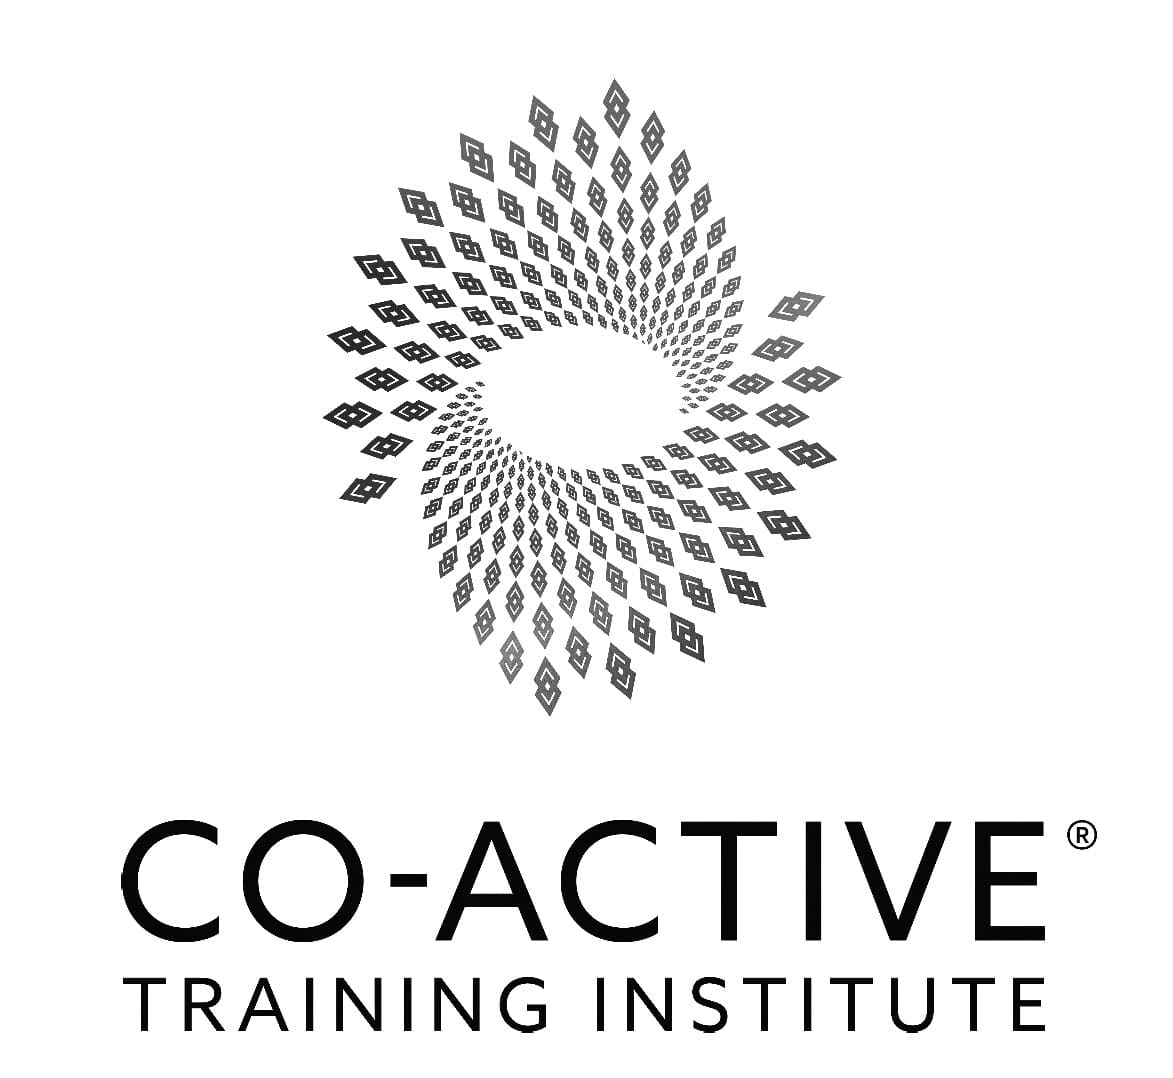 CO-ACTIVE